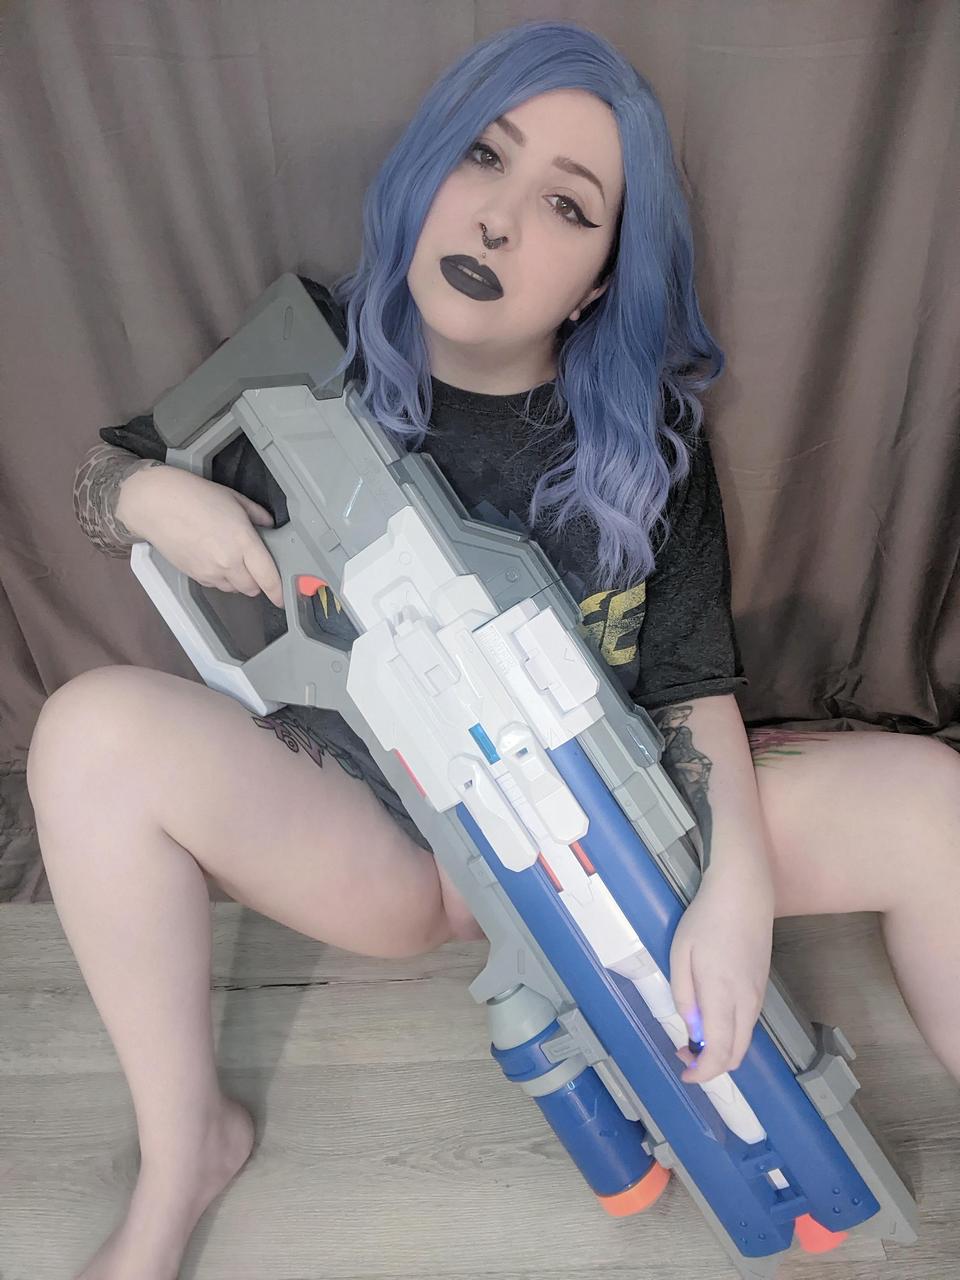 Does Pantie Free Overwatch Nerf Count As A Nerdy Thing 